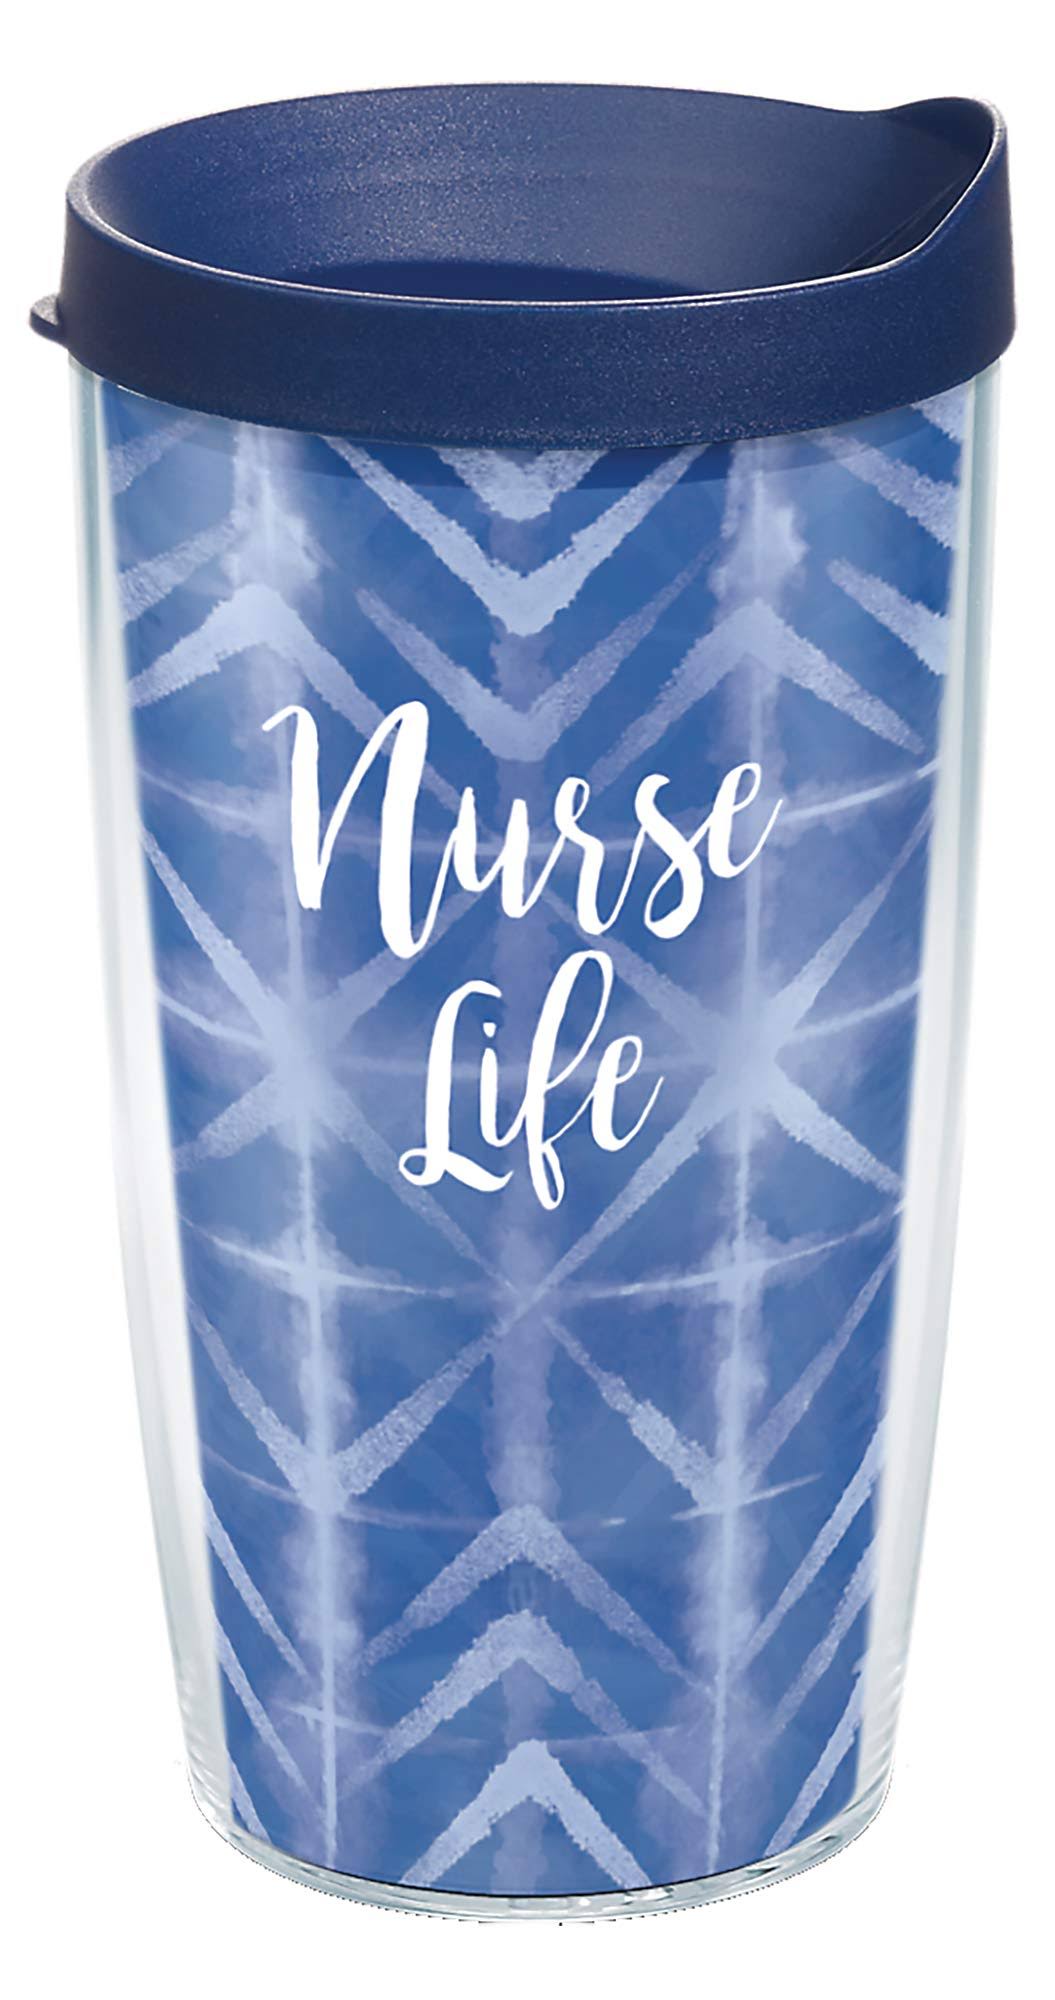 Tervis Nurse Life Made in USA Double Walled Insulated Tumbler, 16oz, Clear